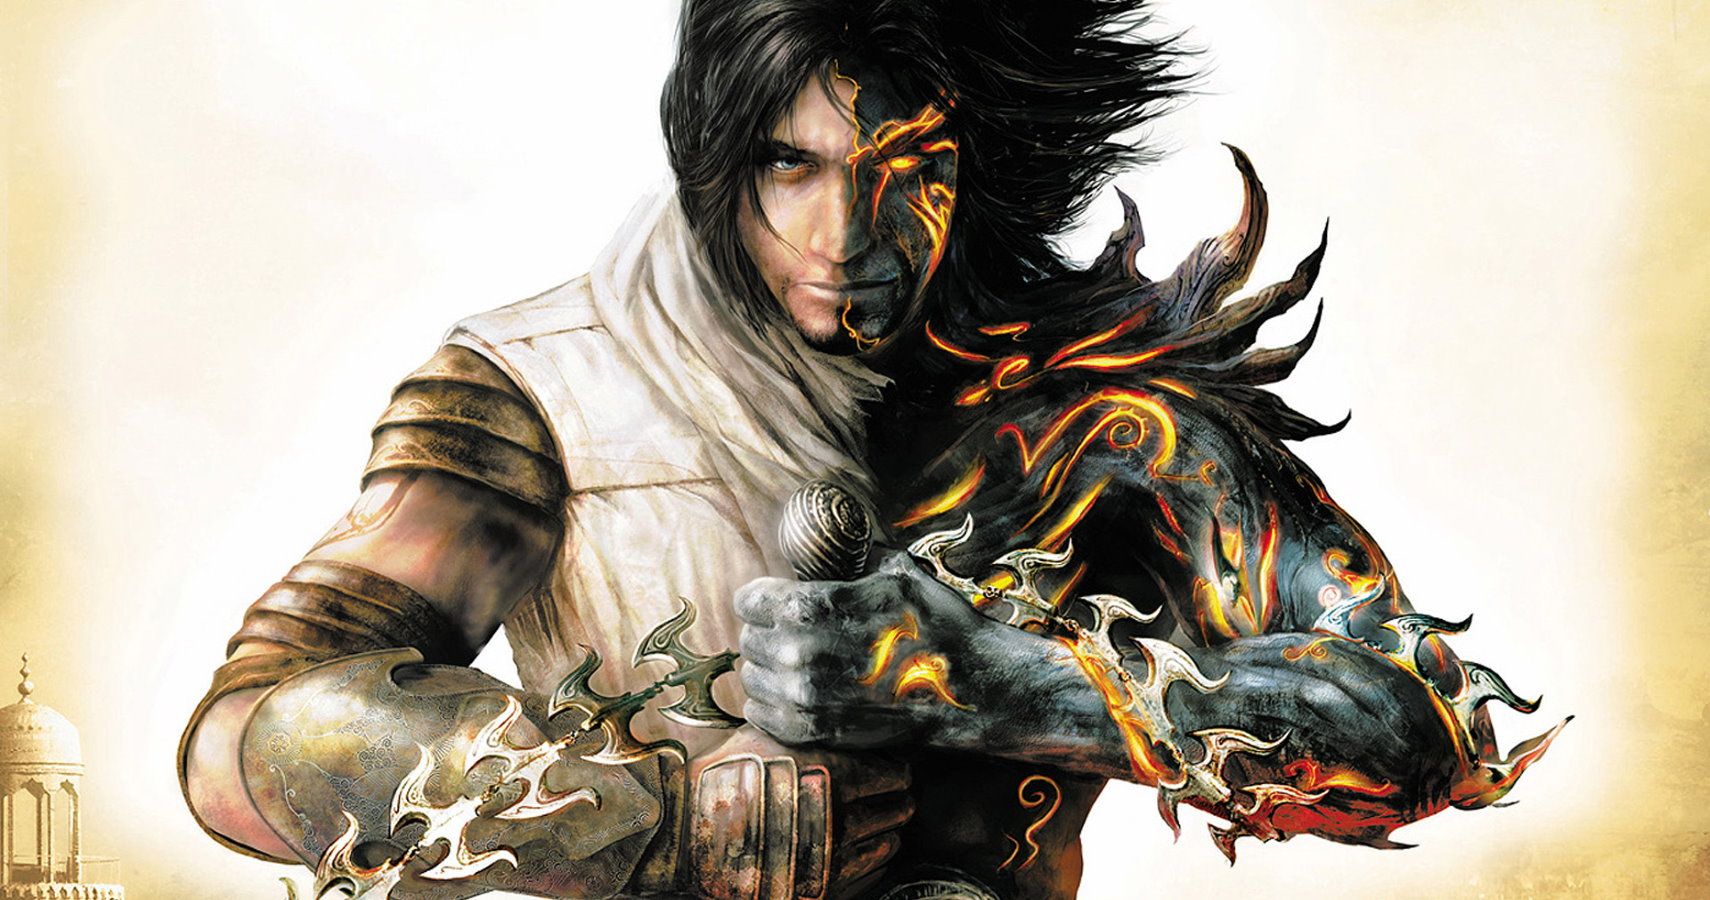 The Prince of Persia remake is not coming to Switch or releasing